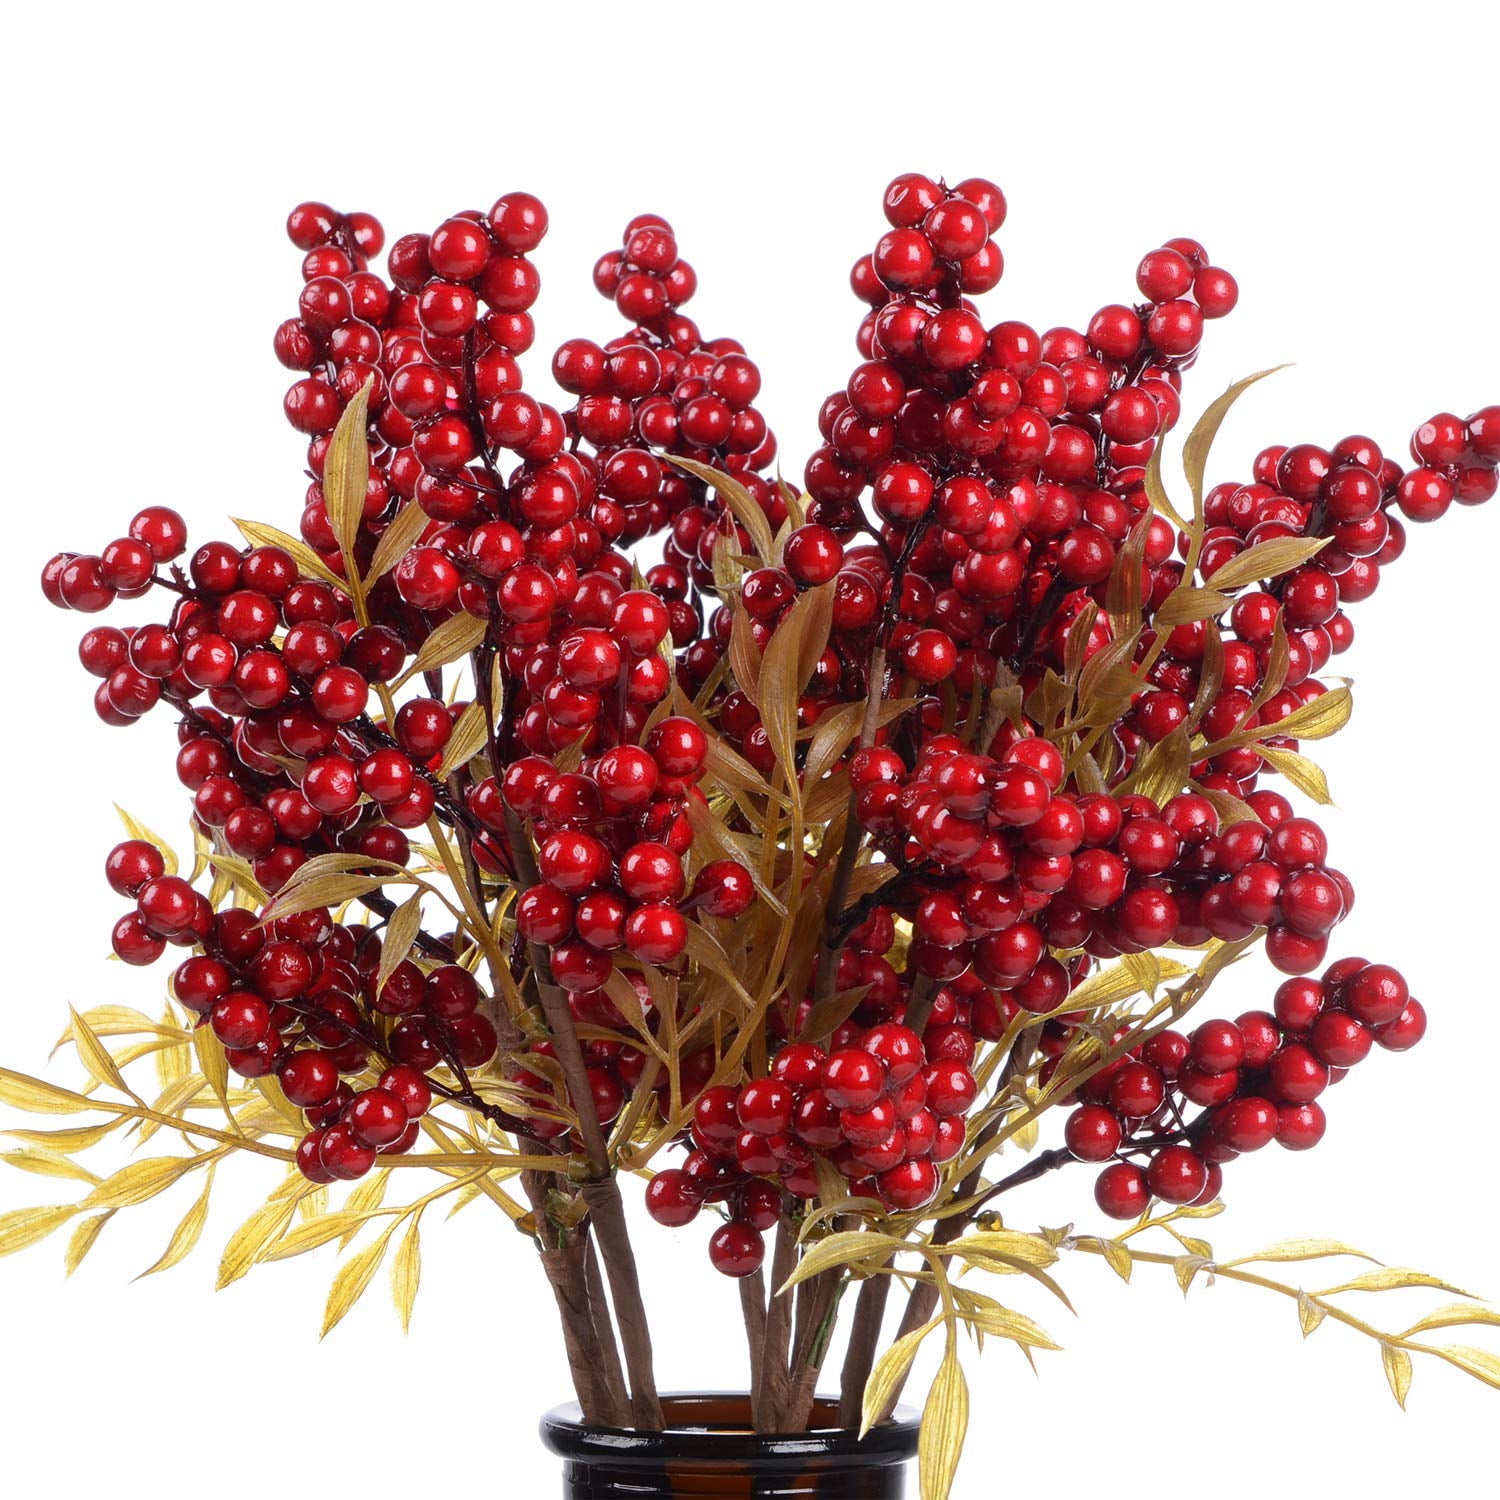 Artificial Berries Bright Red with a Shiny Glazed Finish 3/8 inch x pack of 144 